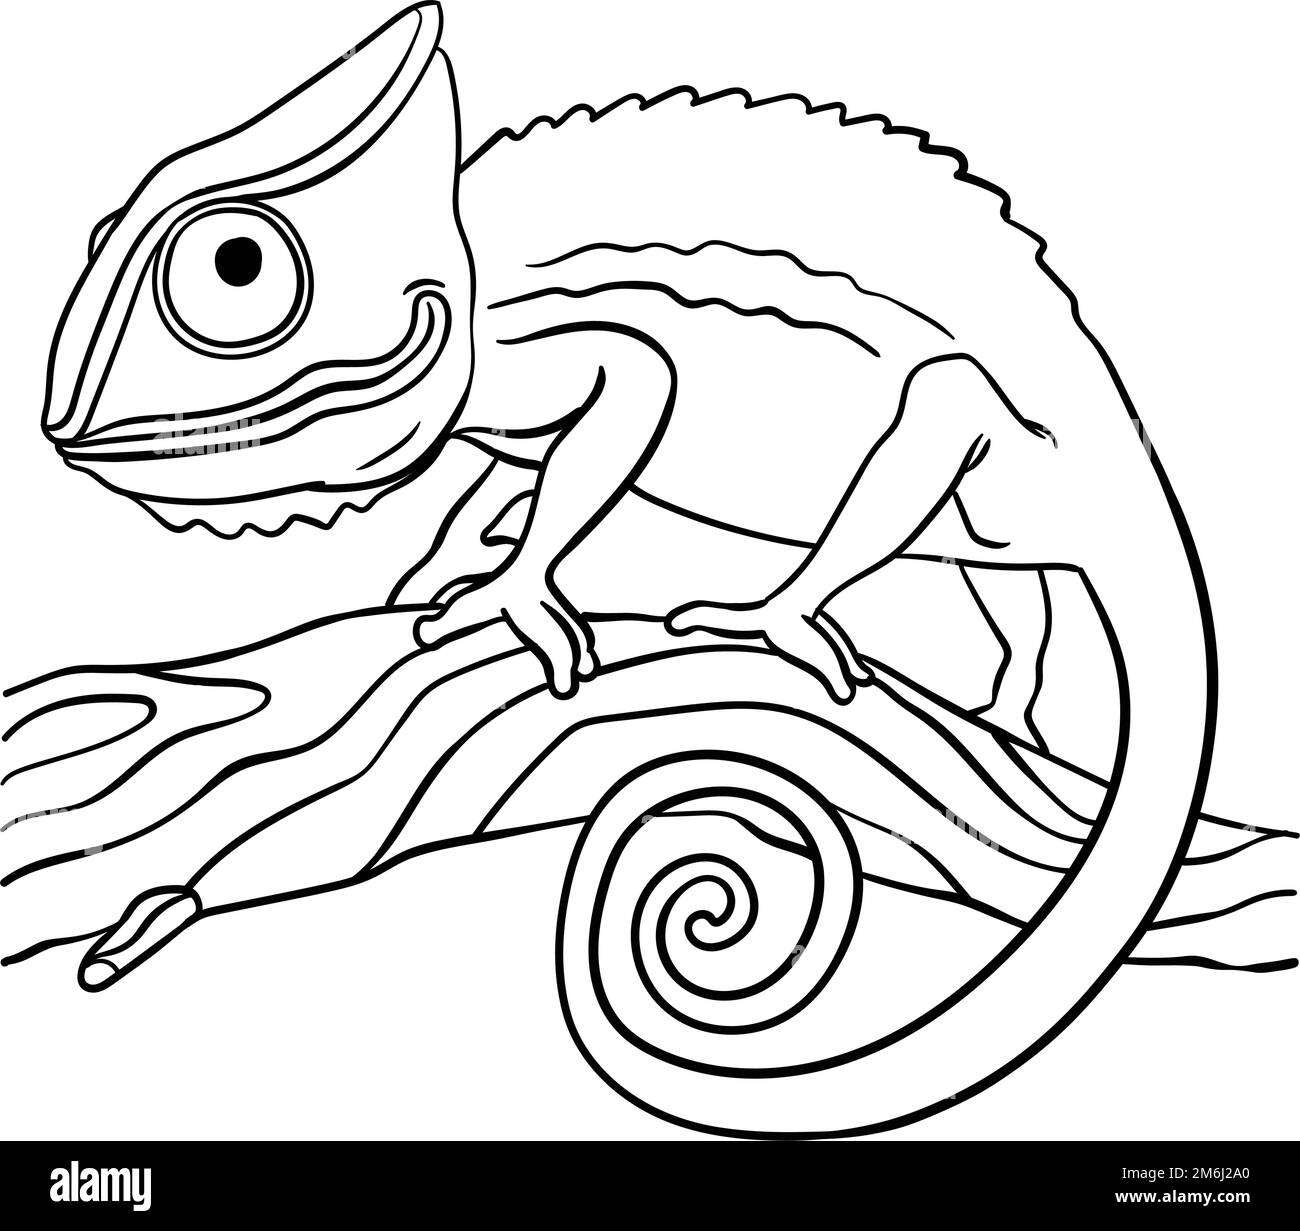 Chameleons Isolated Coloring Page for Kids Stock Vector